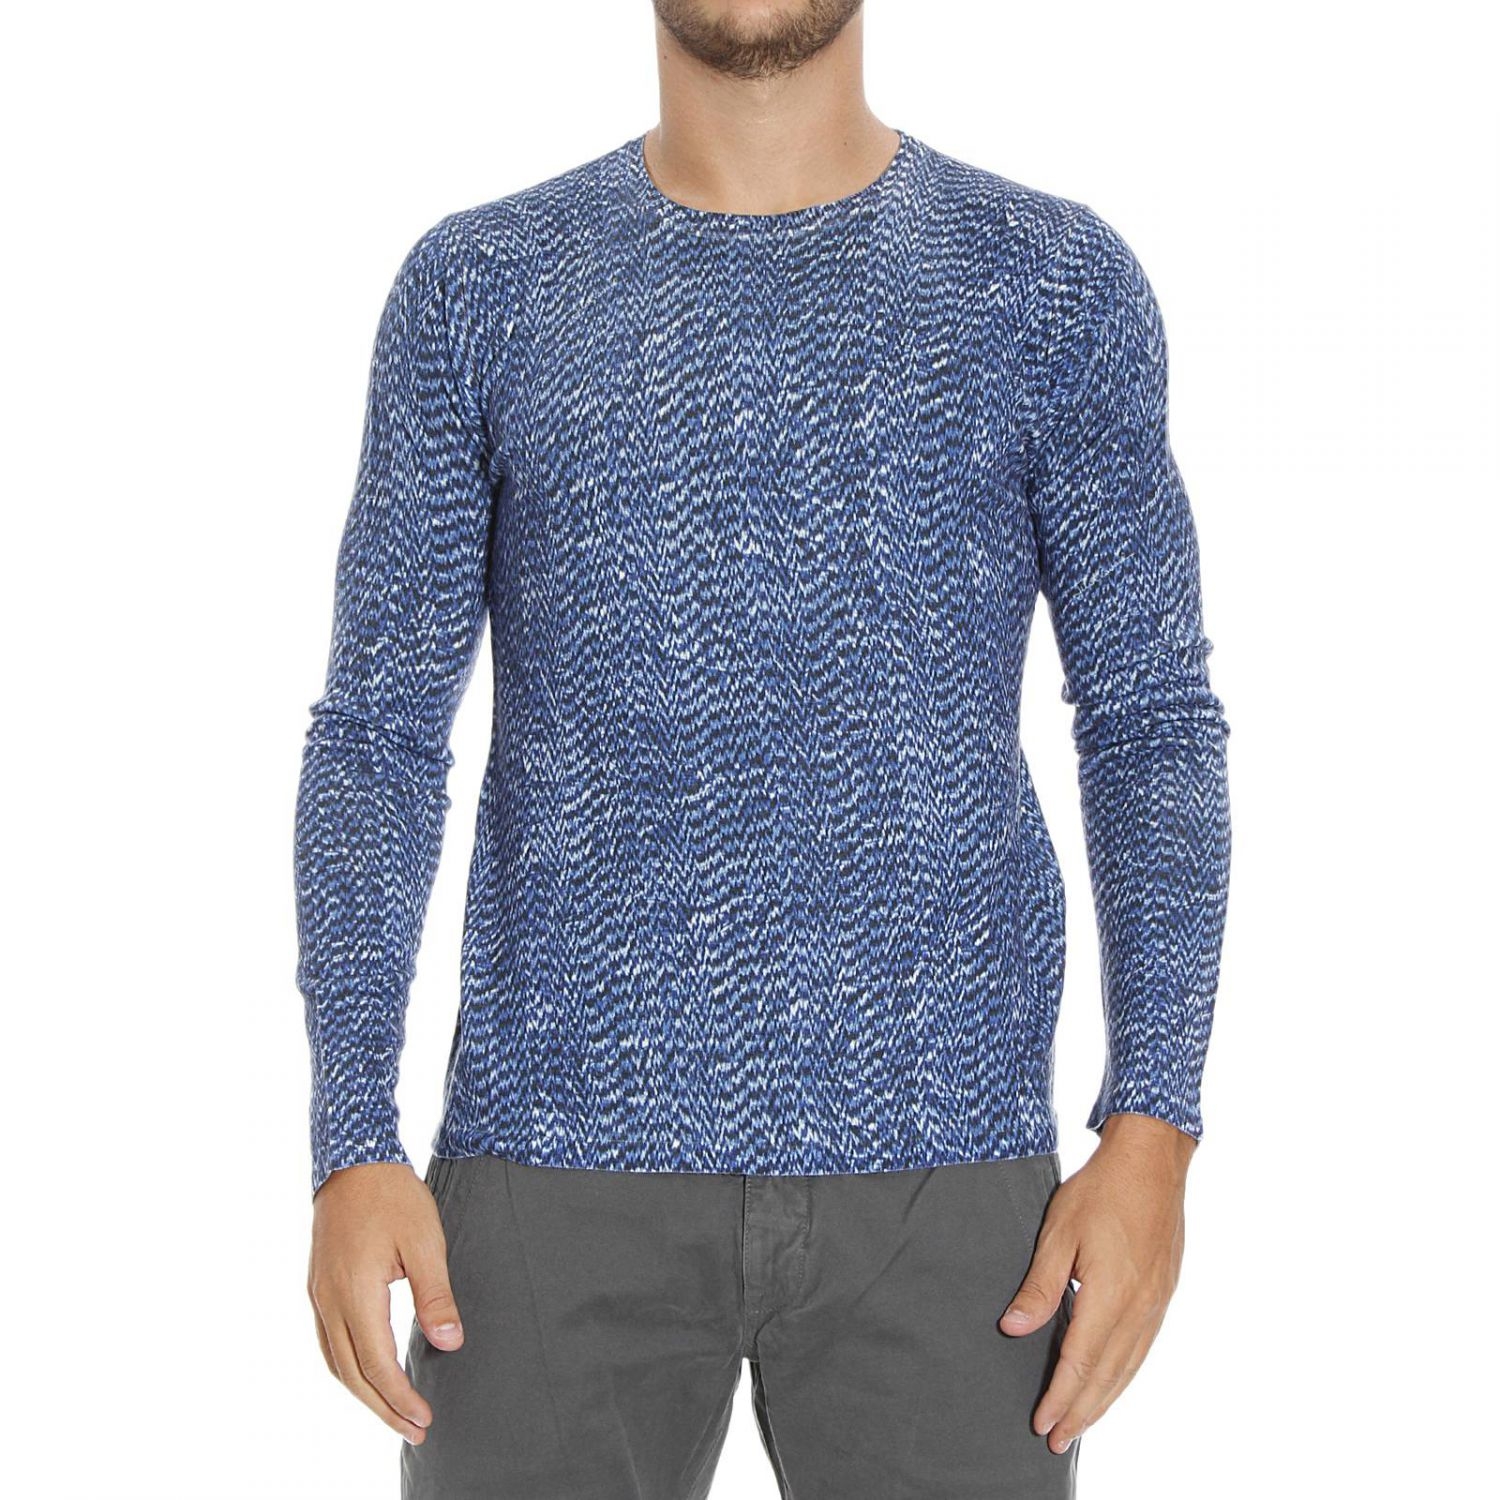 Just Cavalli Wool Sweater in Blue for Men - Lyst